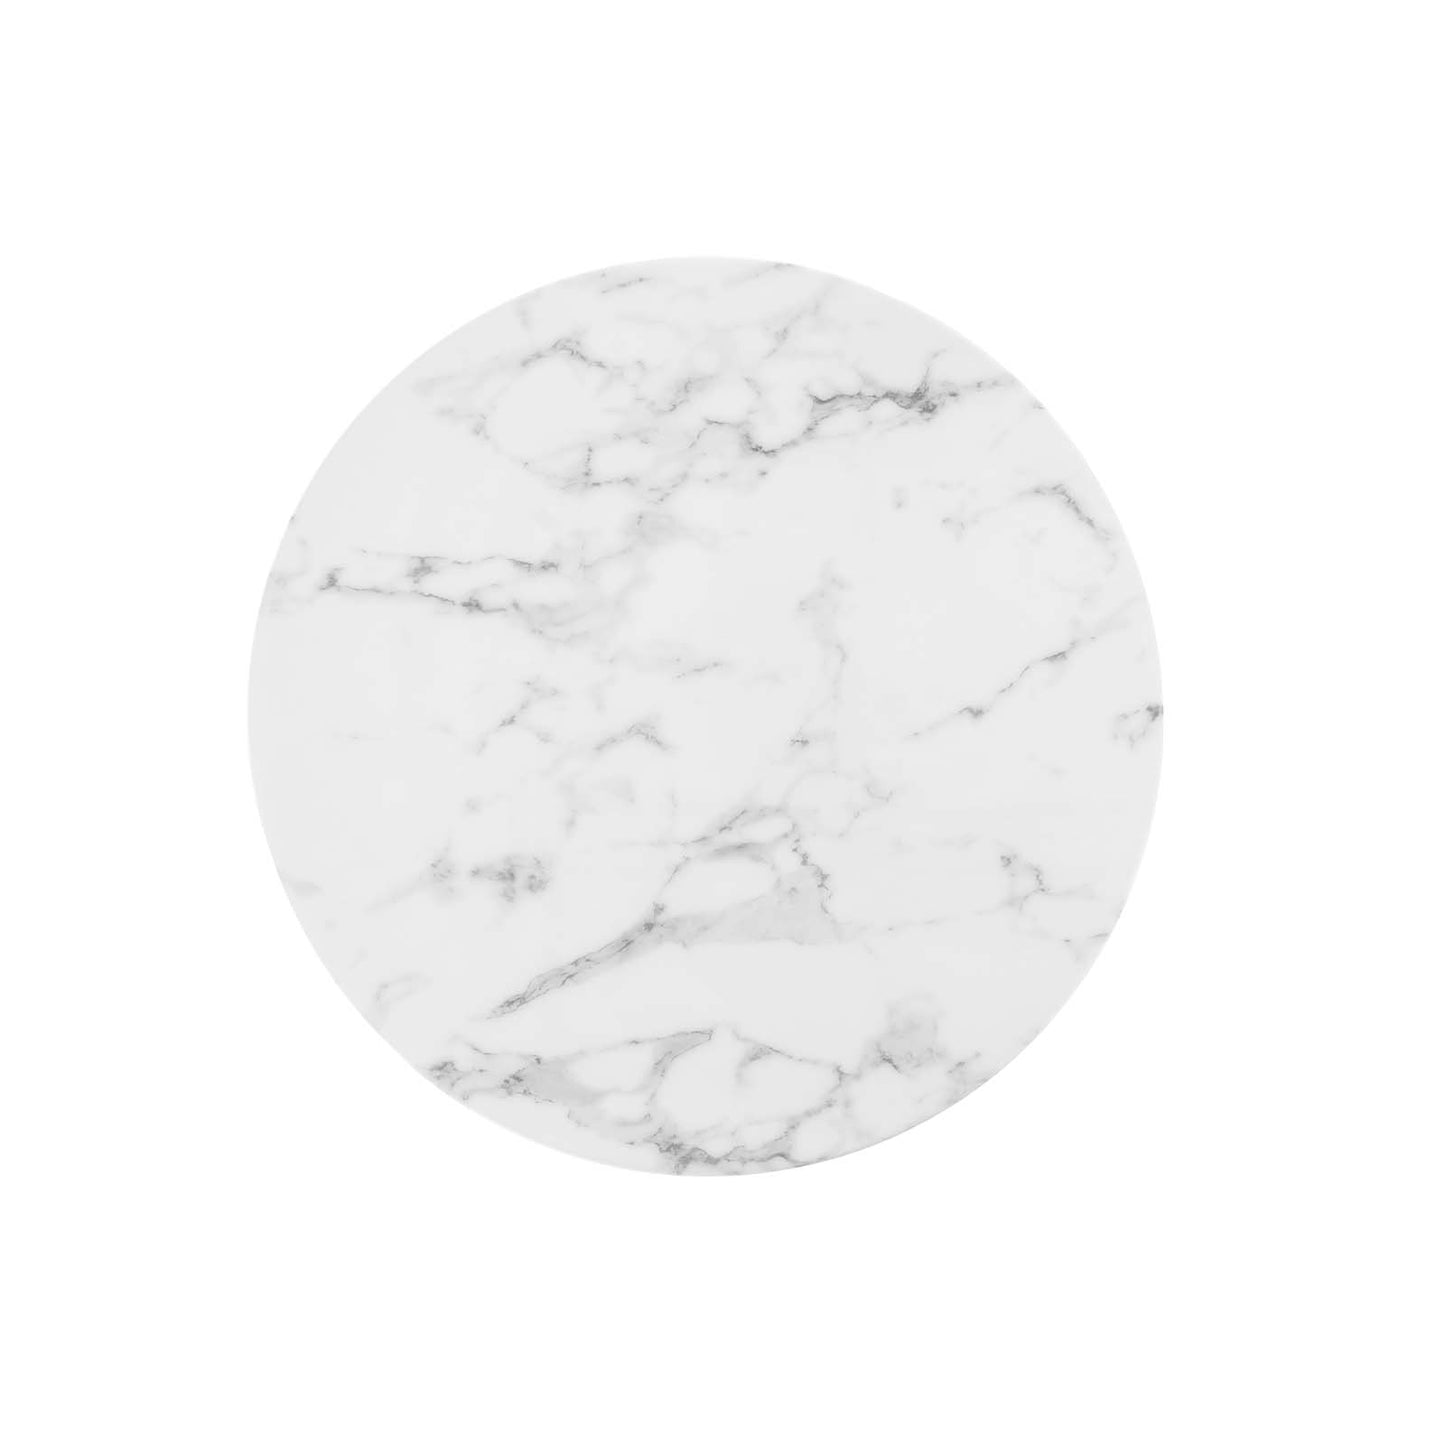 Modway Lippa 28" Round Artificial Marble Dining Table - EEI-1128